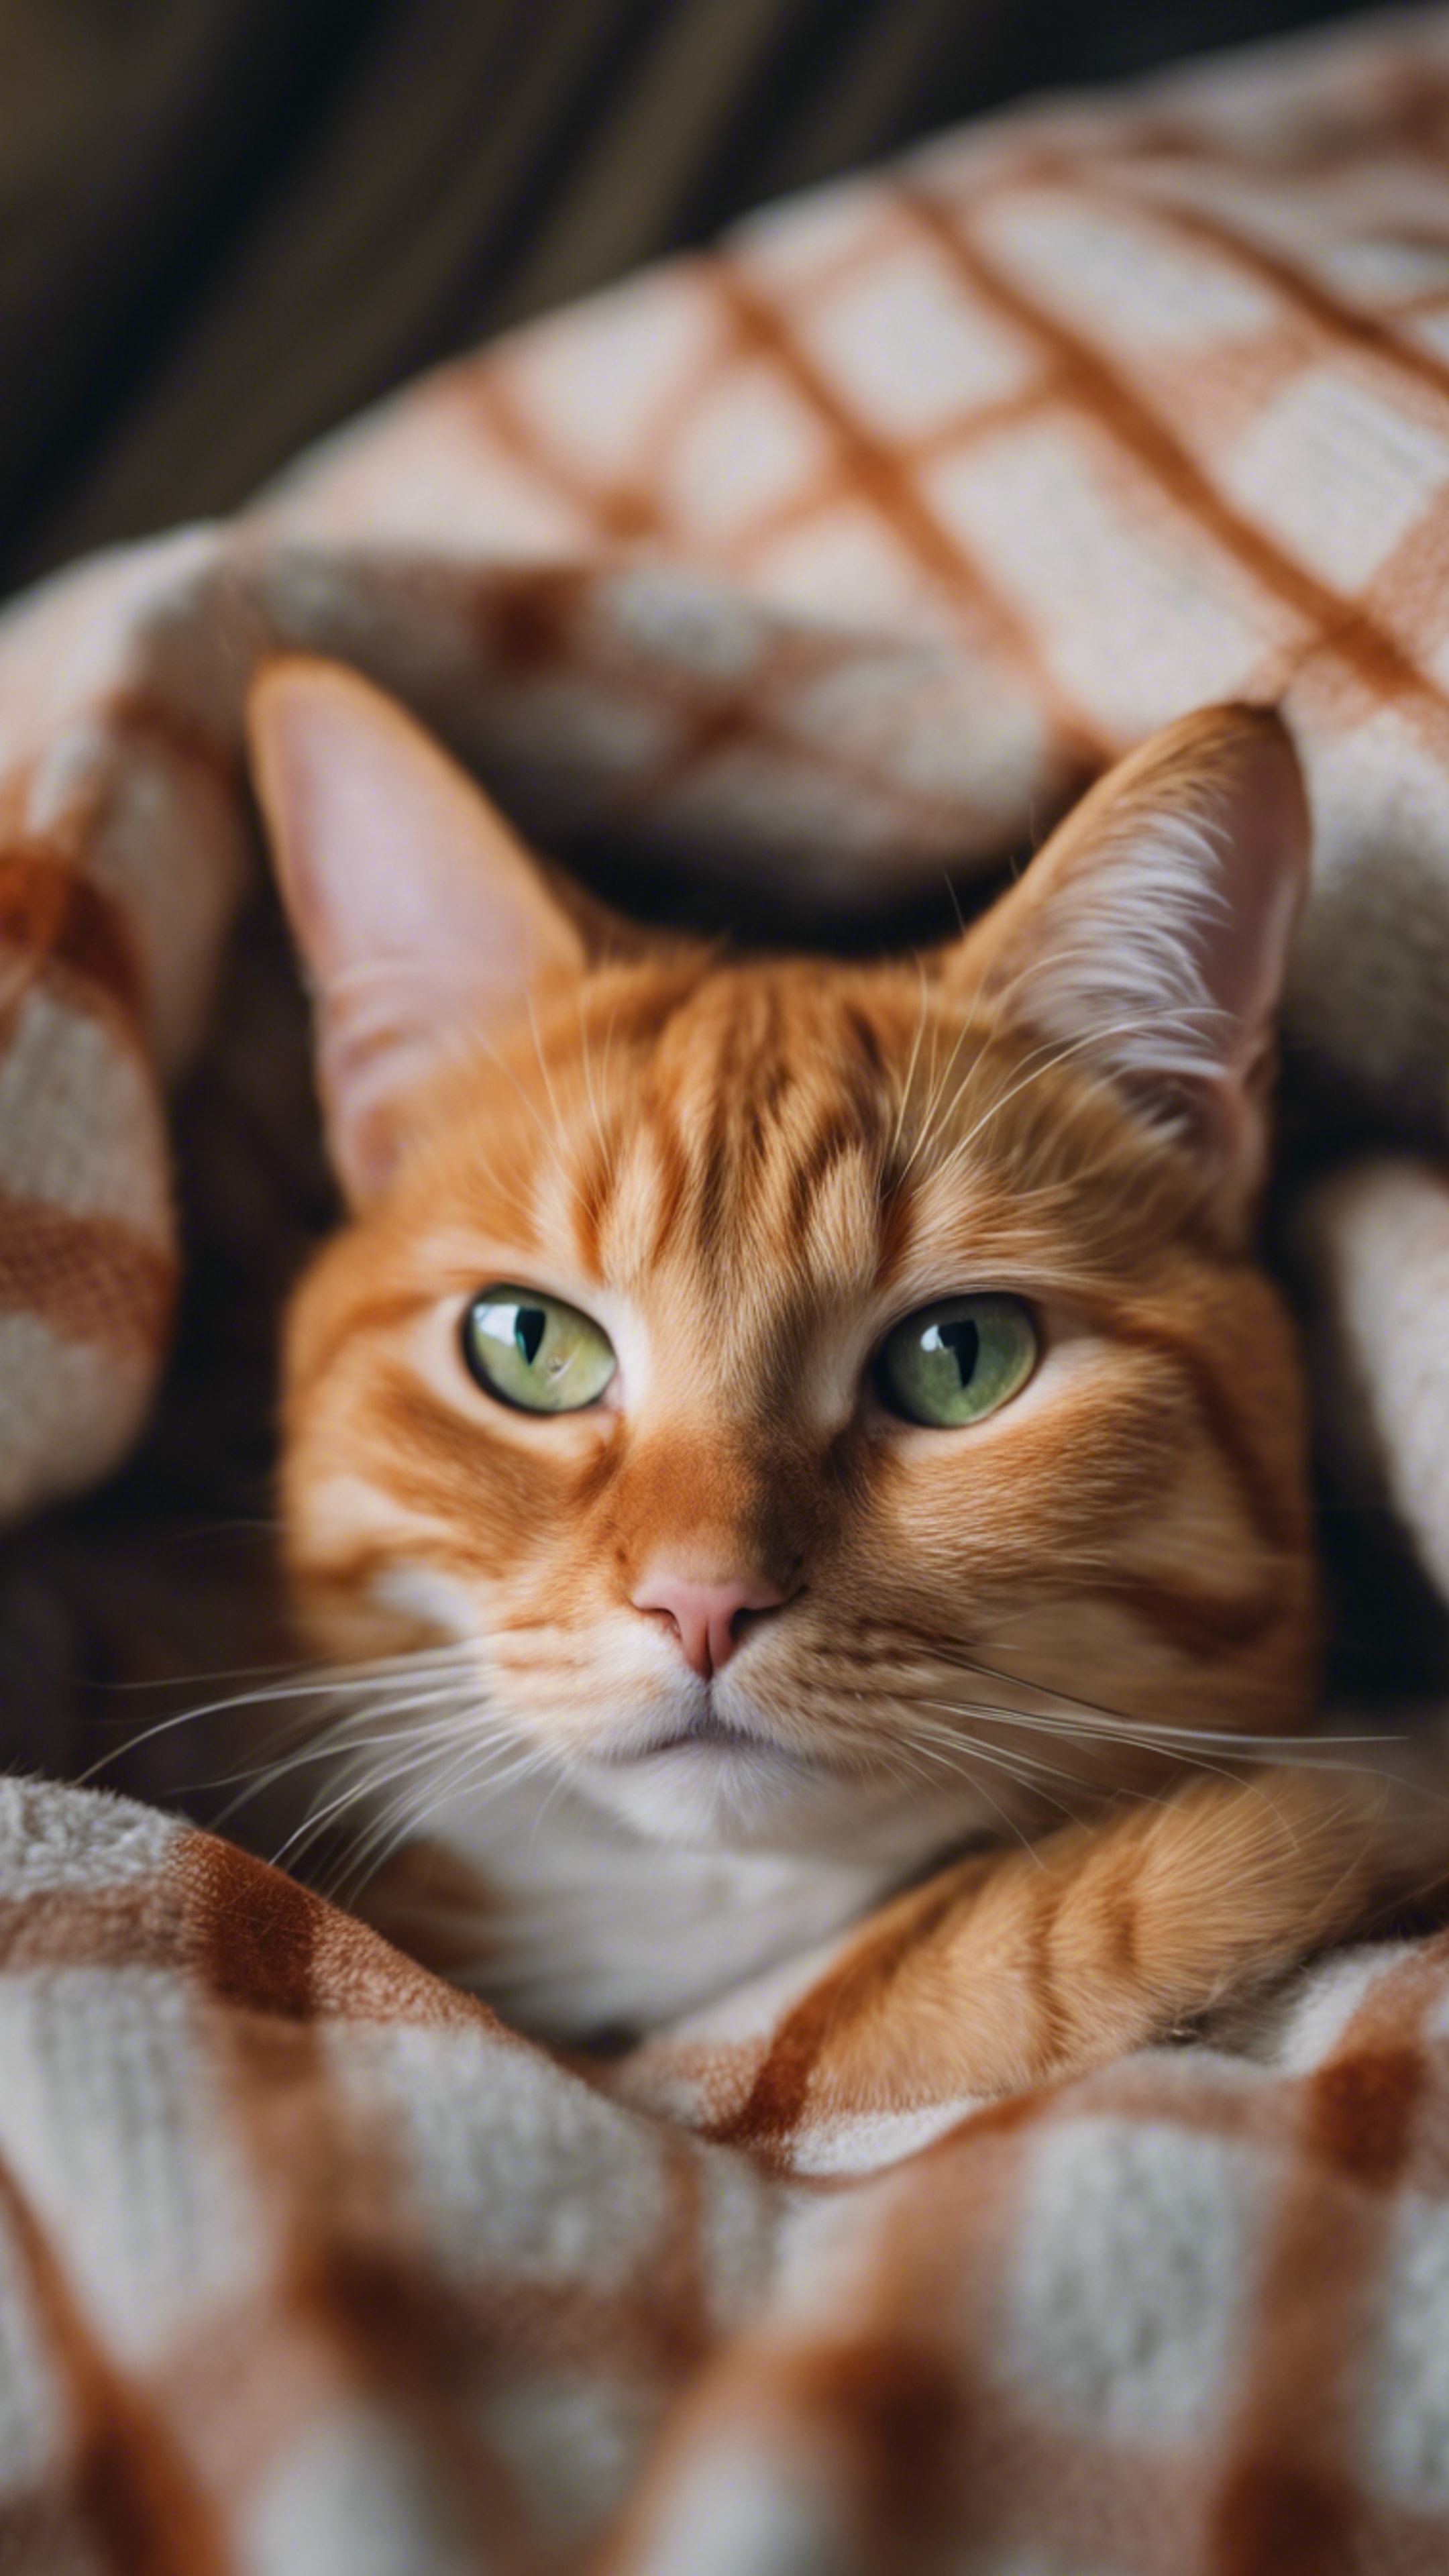 A close up of an orange tabby cat curled up on a cozy plaid blanket, purring gently, with a playful glint in its eyes. ورق الجدران[45e4538616504ff6a891]